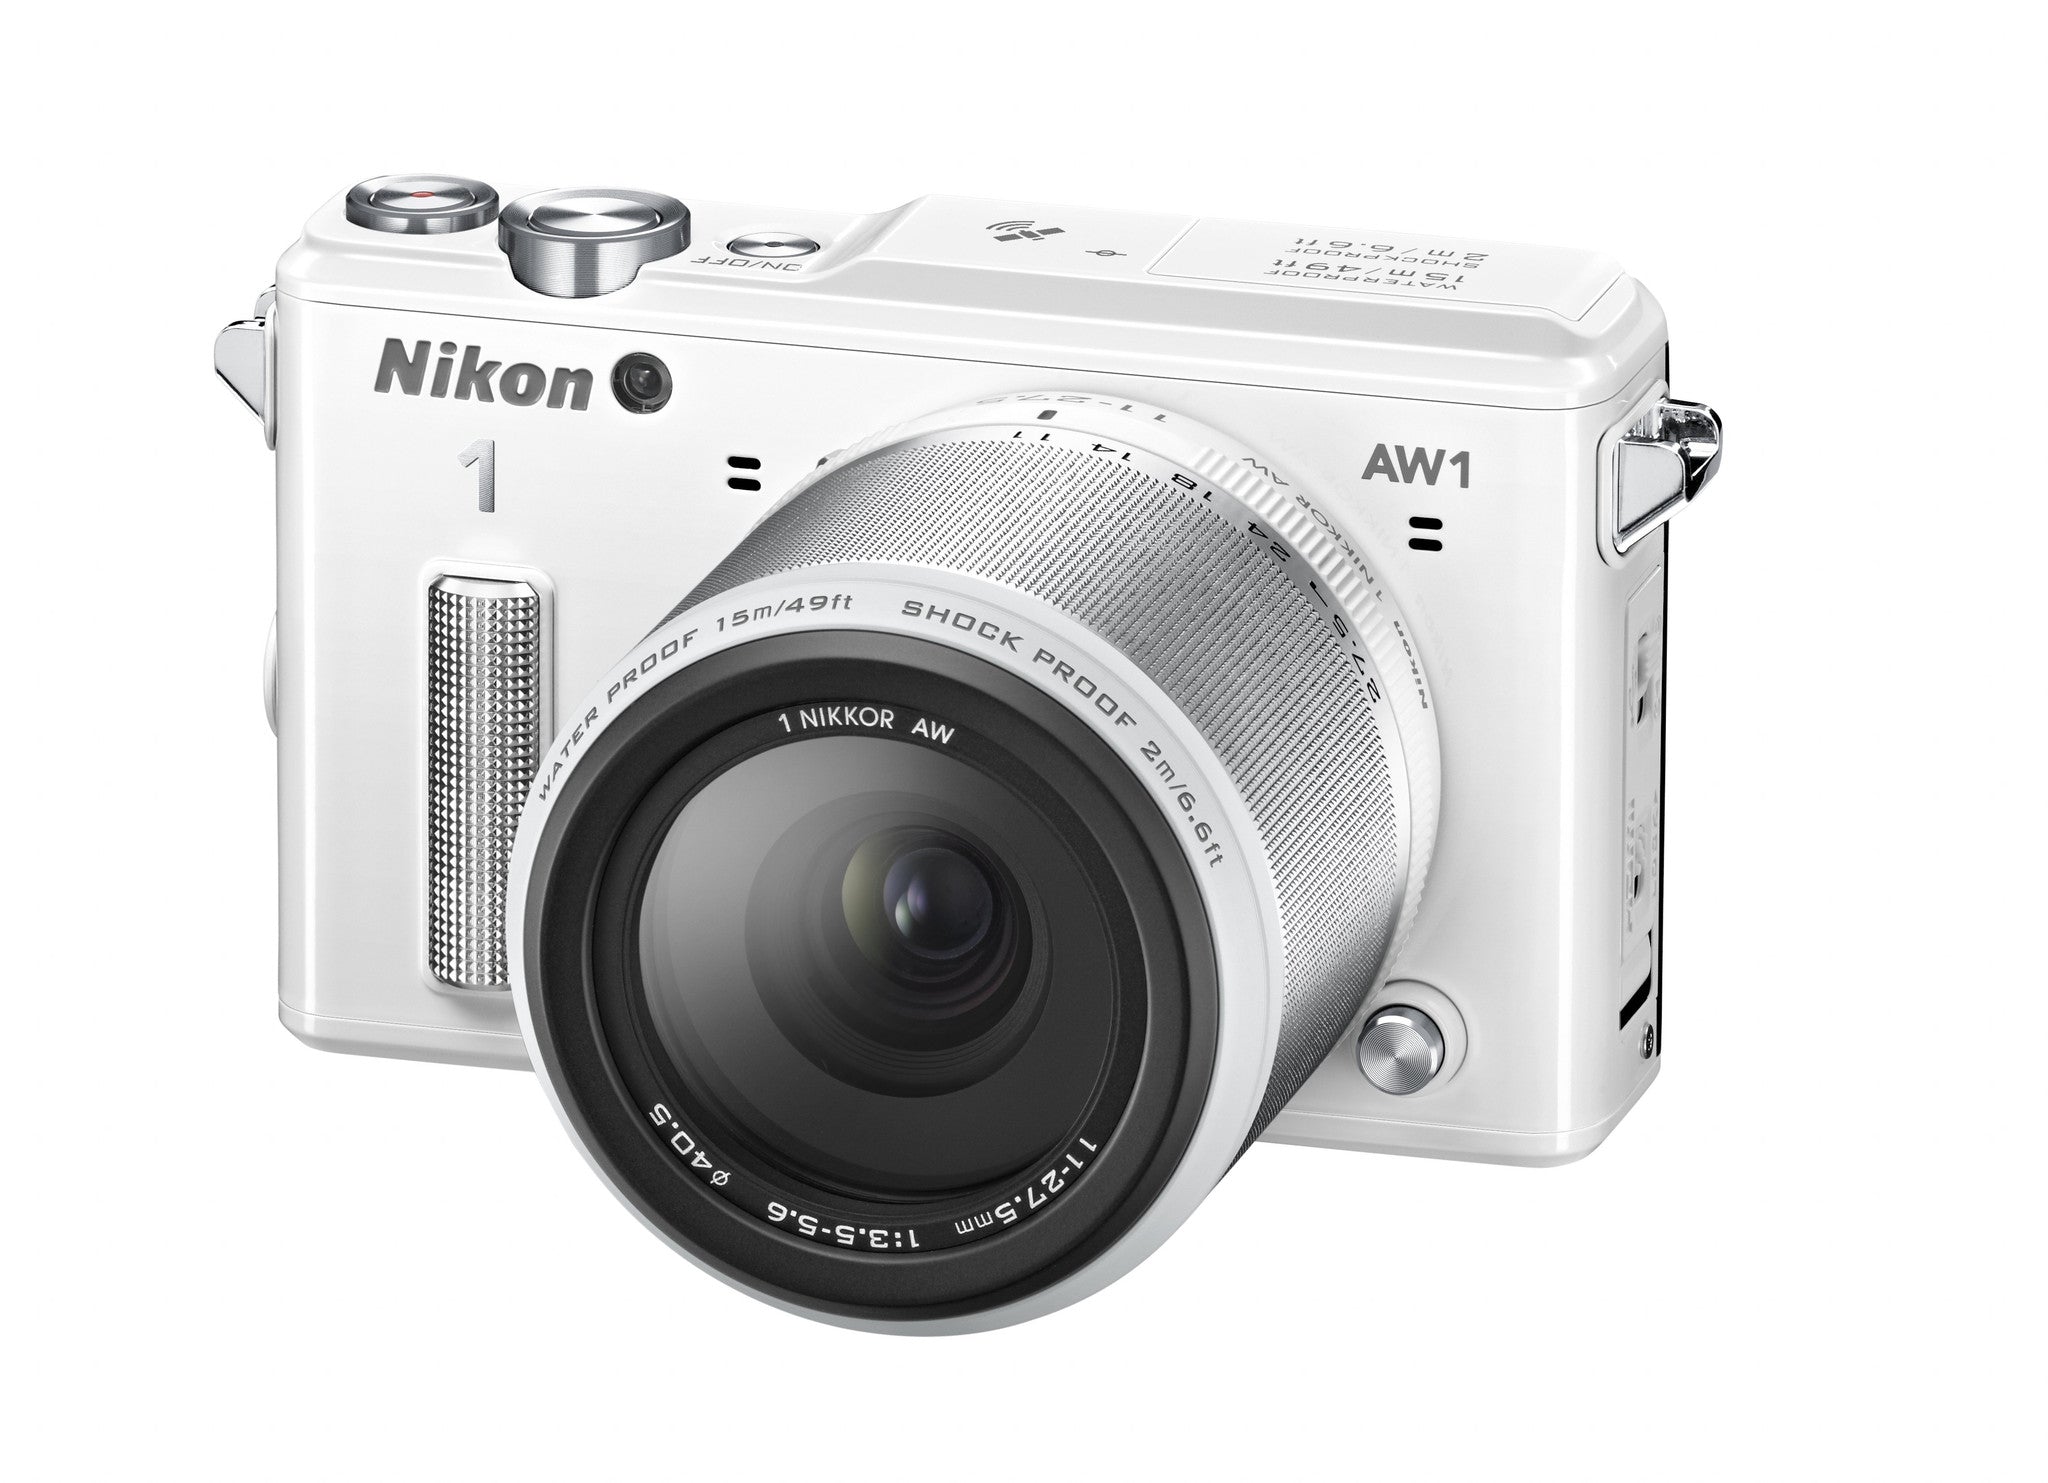 Nikon 1 AW1 Waterproof Digital Camera with AW 11-27.5mm Lens (White), discontinued, Nikon - Pictureline  - 4